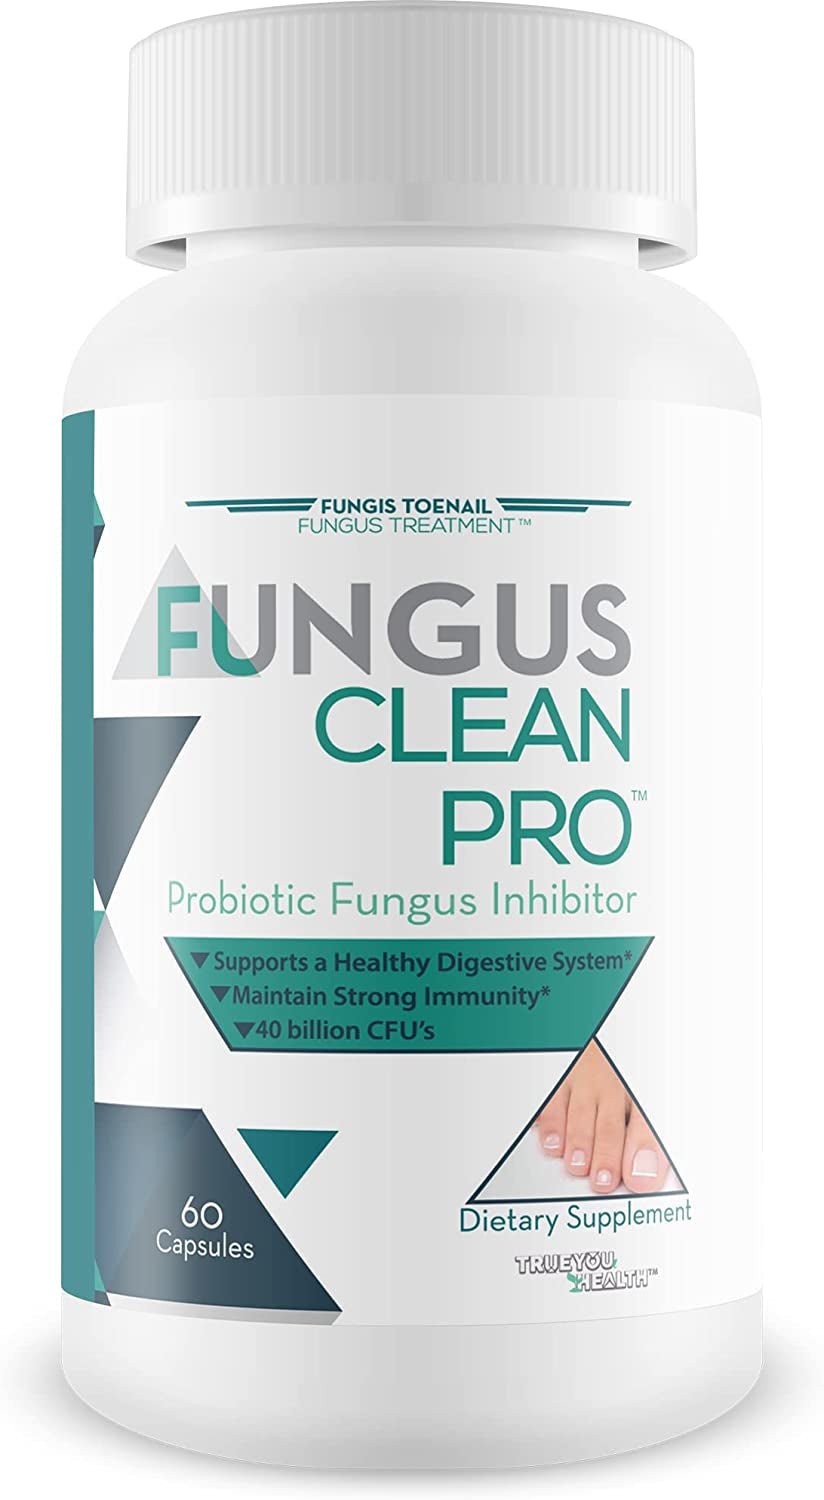 Fungus Clean Pro - Probiotic Fungus Inhibitor - Fight off Fungus from the inside Out with This Powerful Fungus Defense Probiotic - by  - Protect Your Body from Fungus